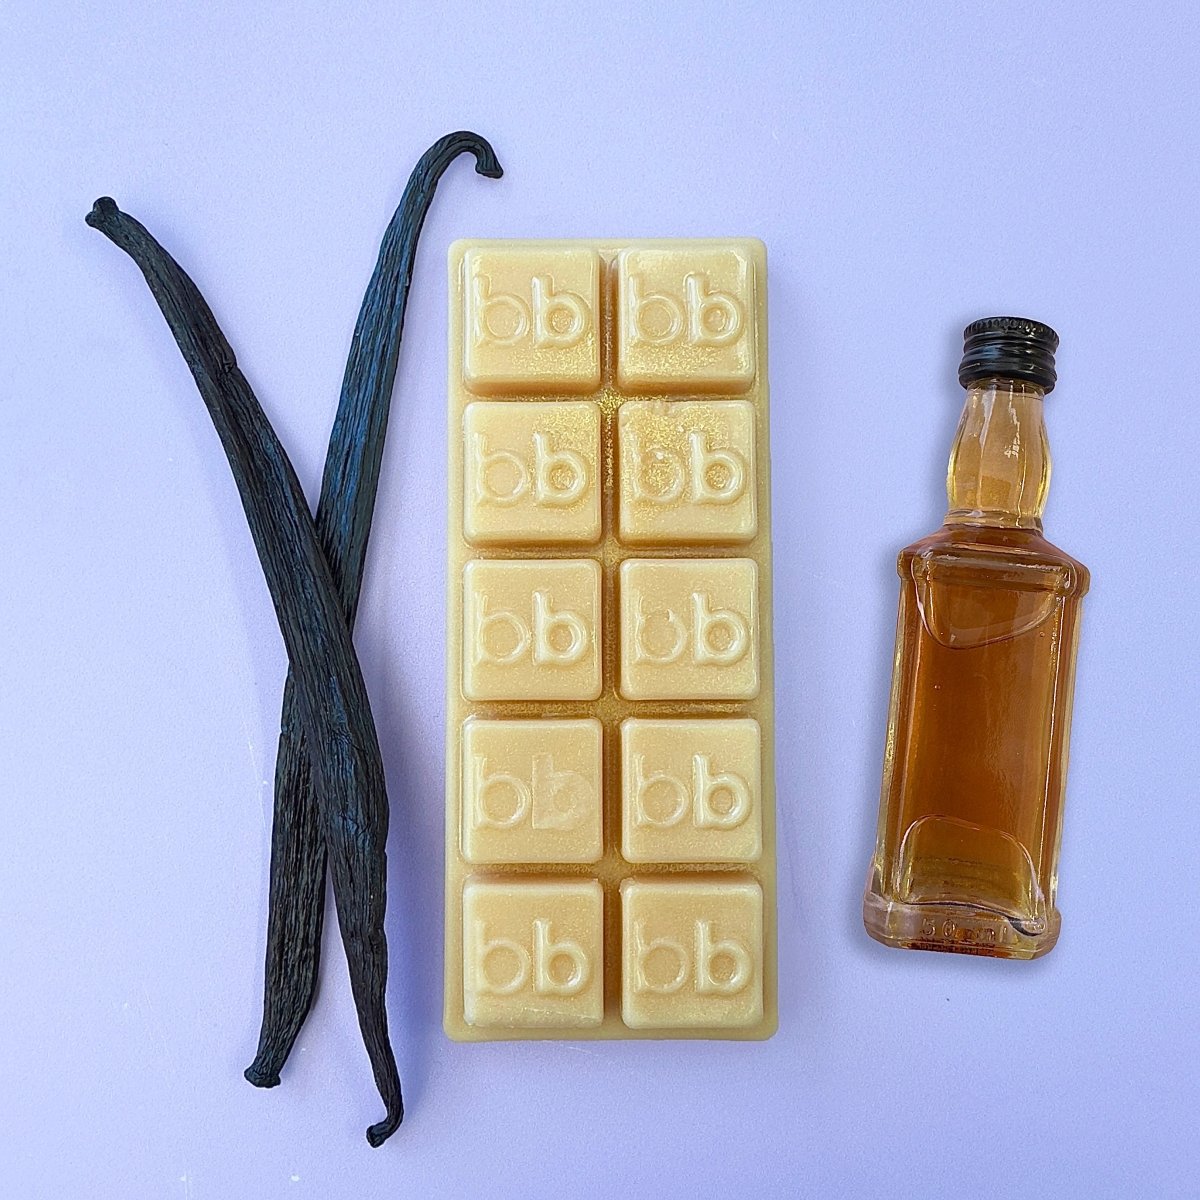 Vanilla Bourbon Natural Soy Wax Melts - Candle Alternative Aromatherapy Strong Scent Fragrance Made in Australia by Bath Box